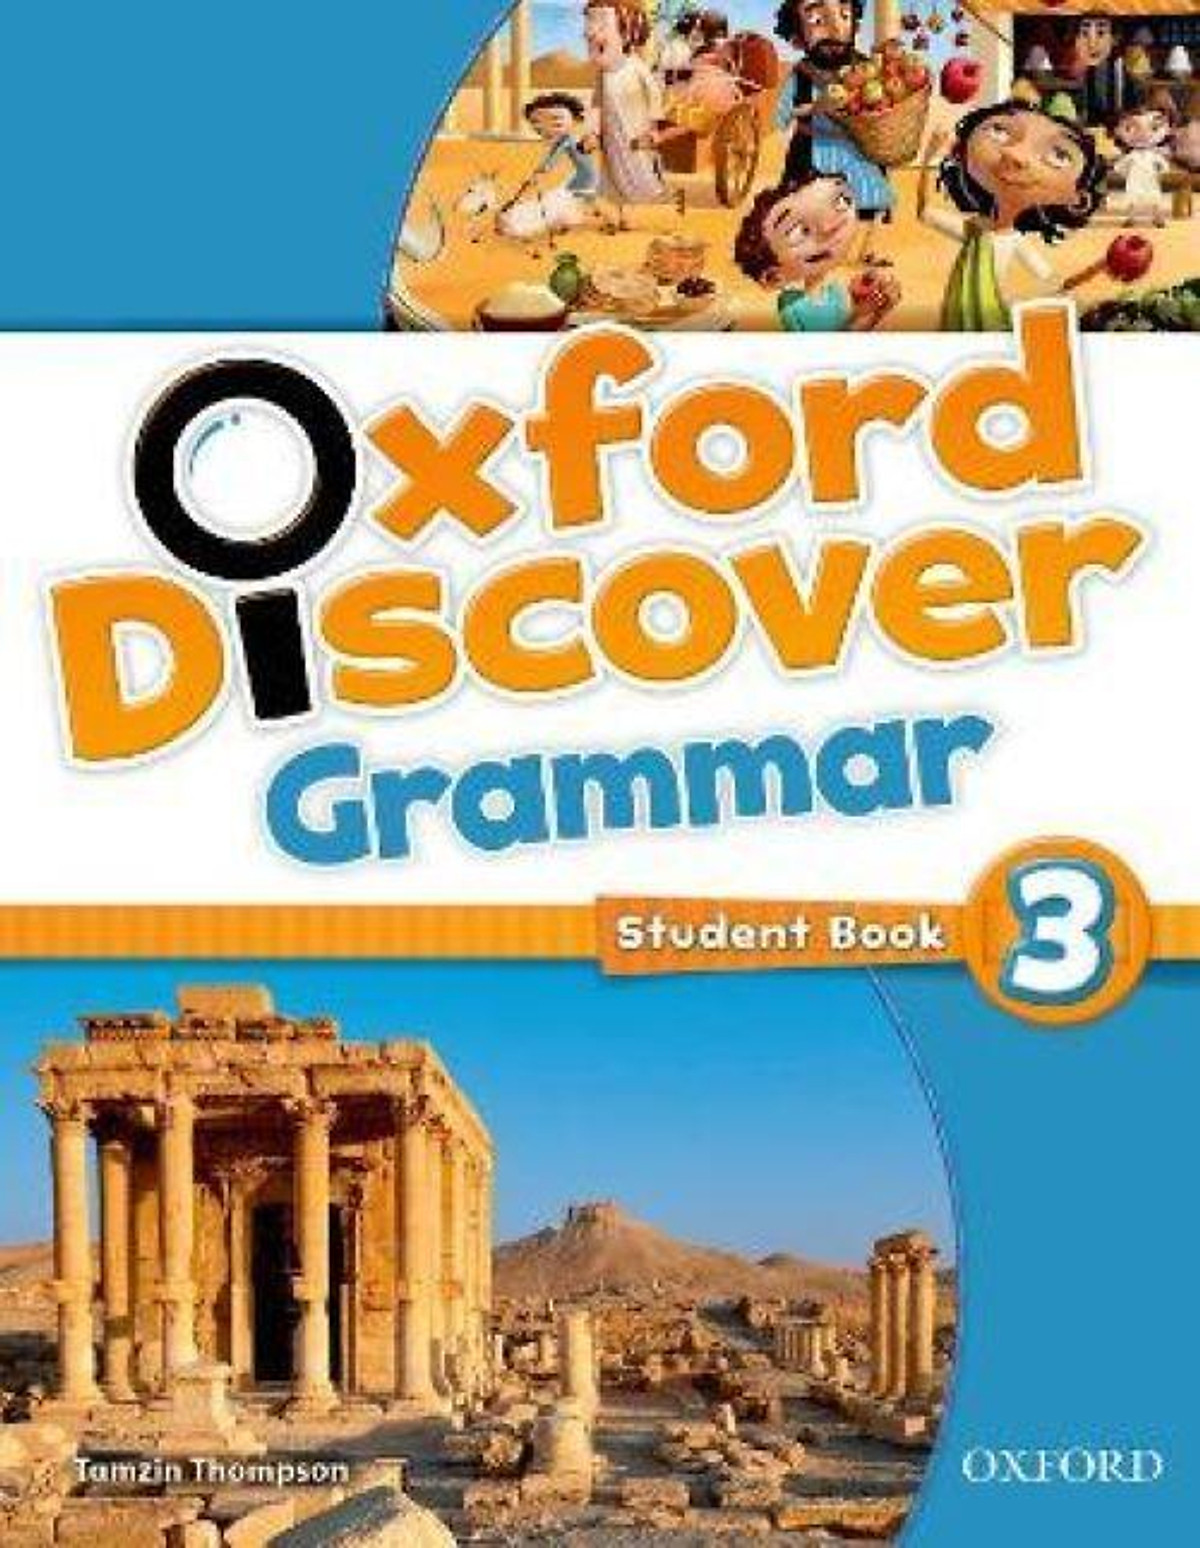 Oxford Discover Grammar: Level 3 Student's Book